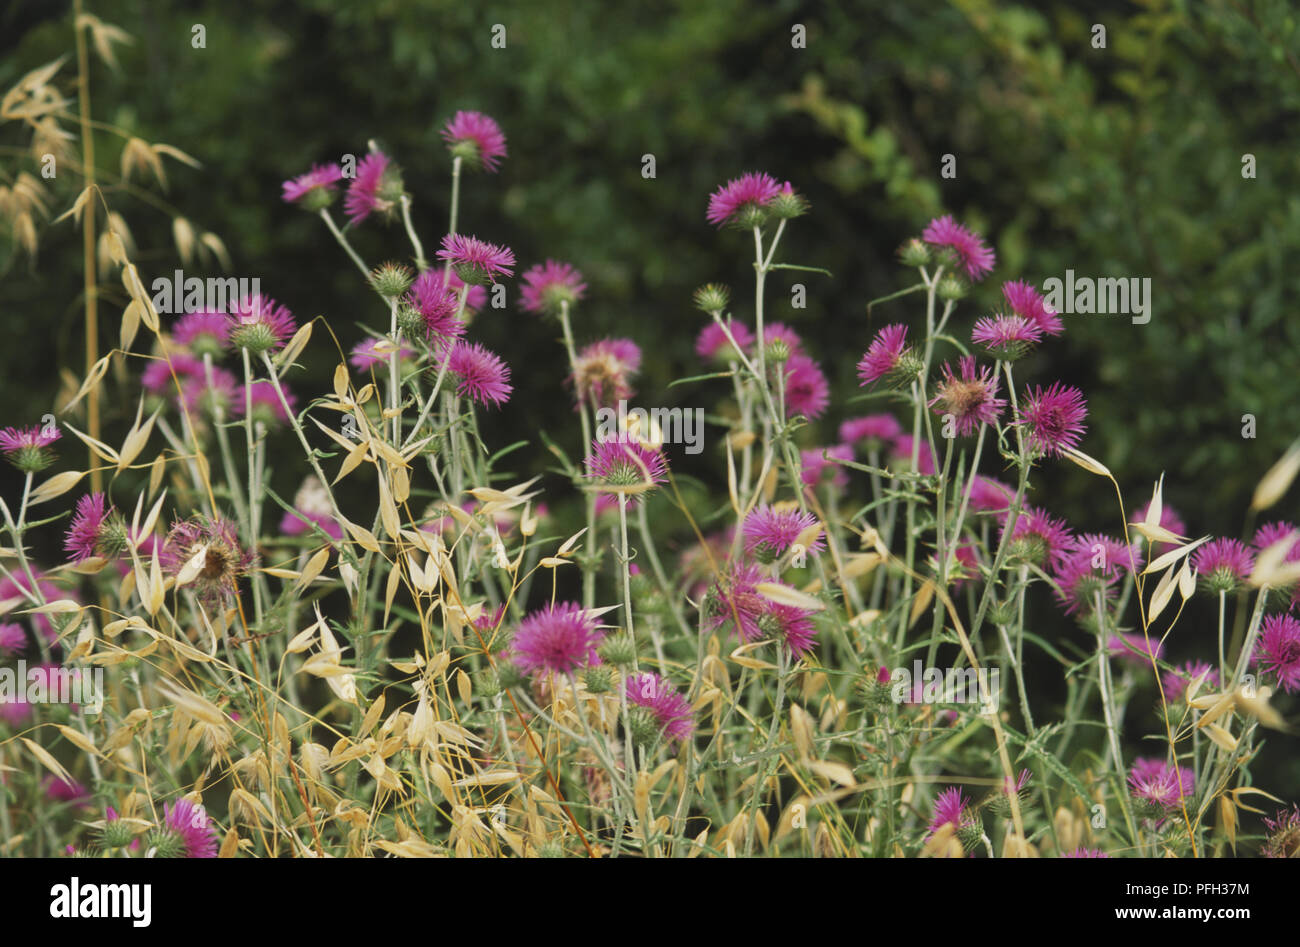 Italy, Central Tuscany, wild thistle flowers in a field, close-up Stock Photo